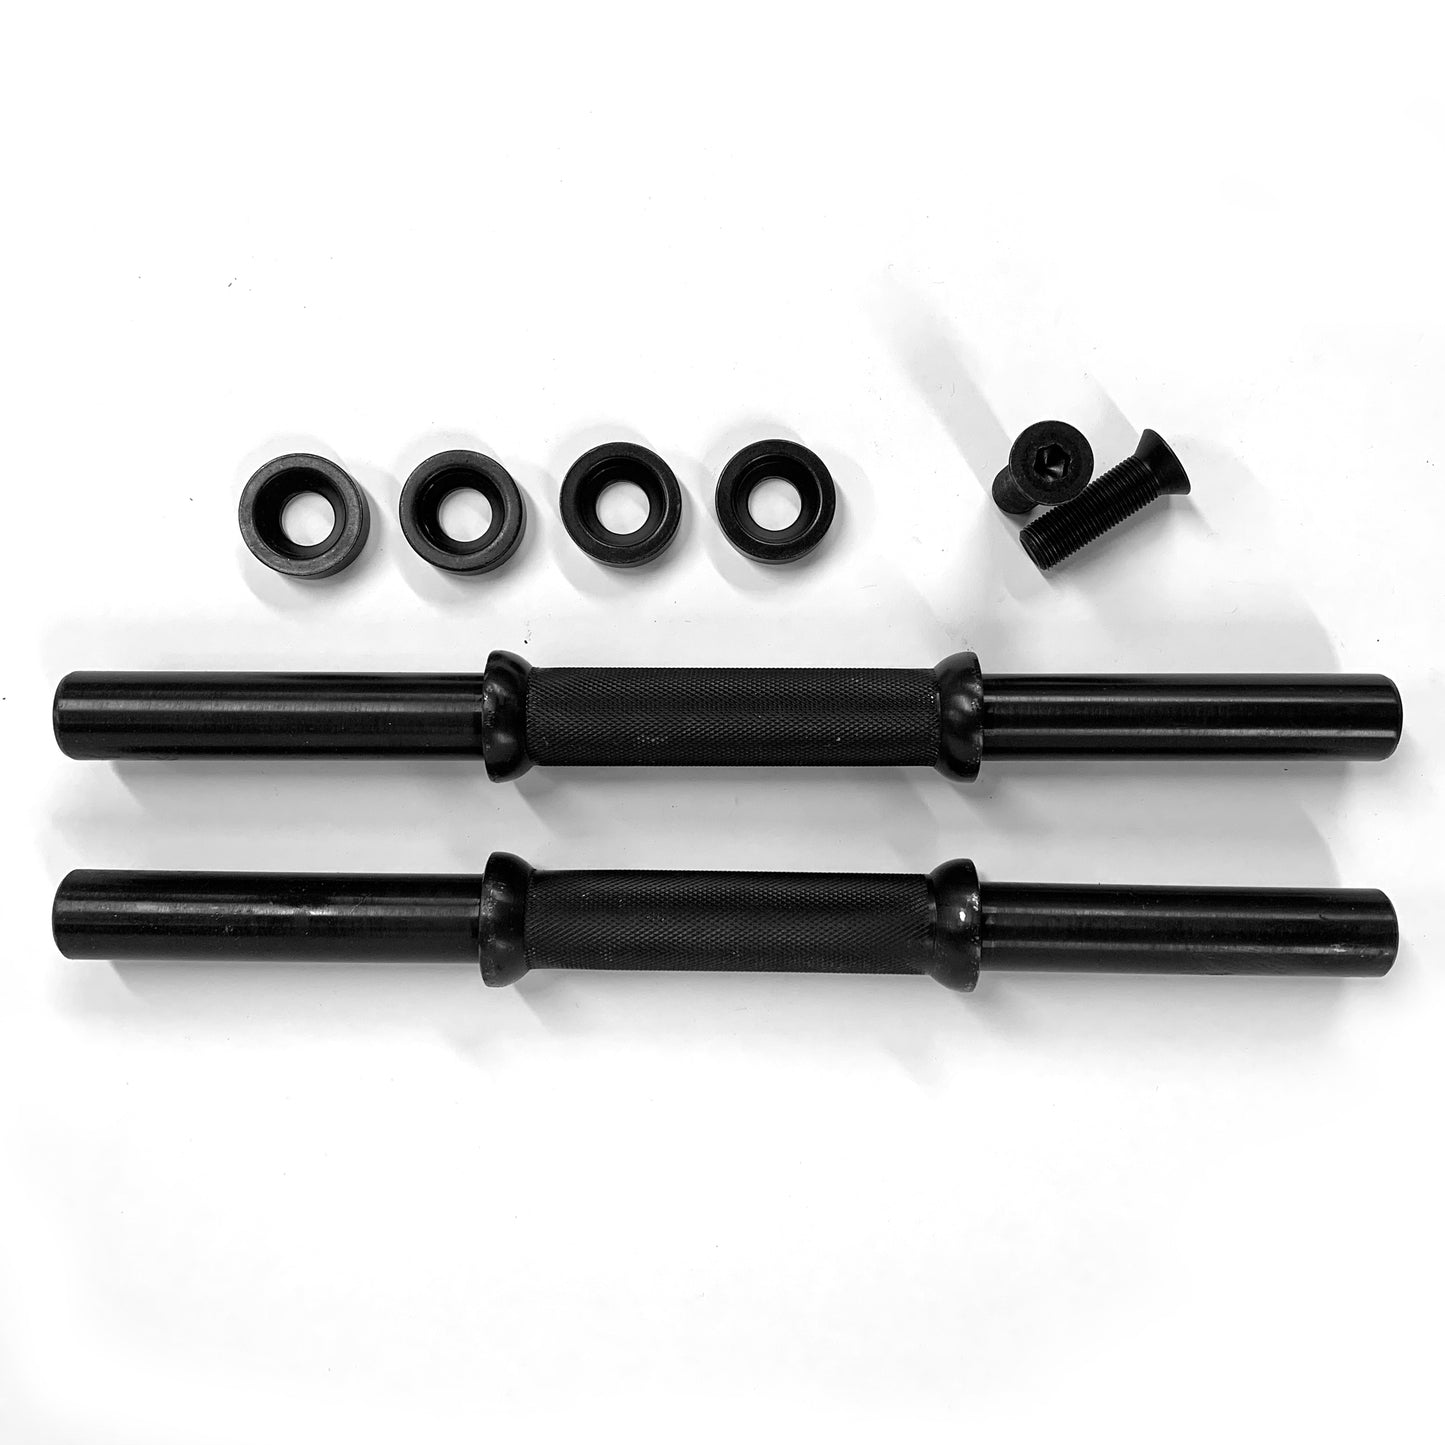 IVANKO 30MM Black Dumbbell Handles, Discontinued stock.